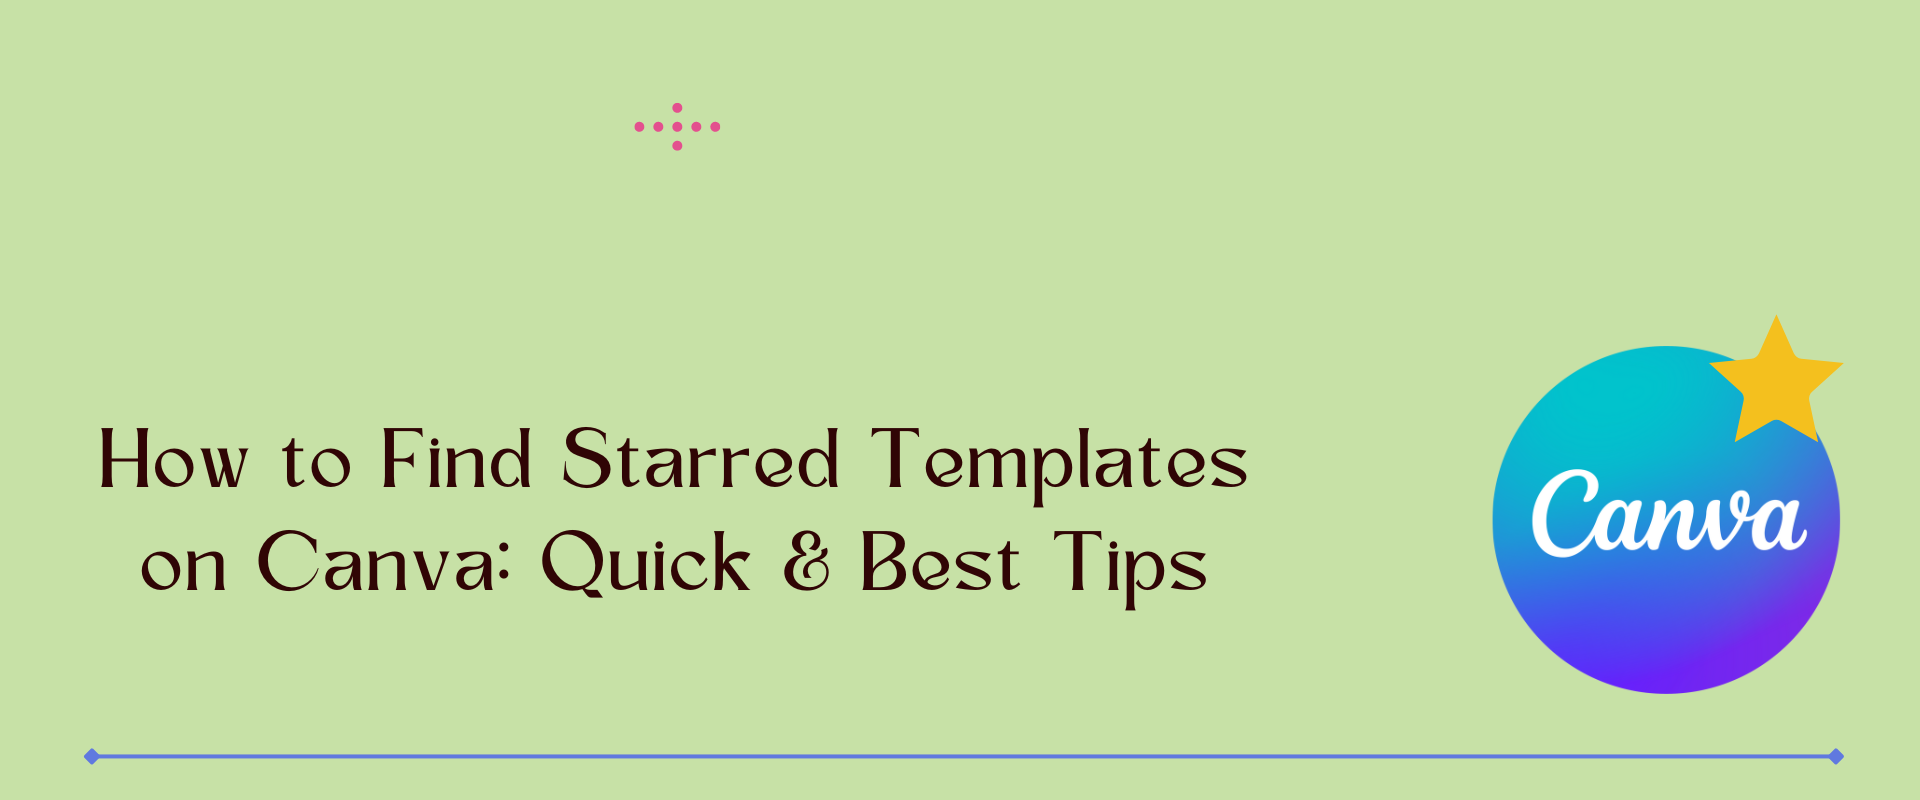 how to find starred templates on canva